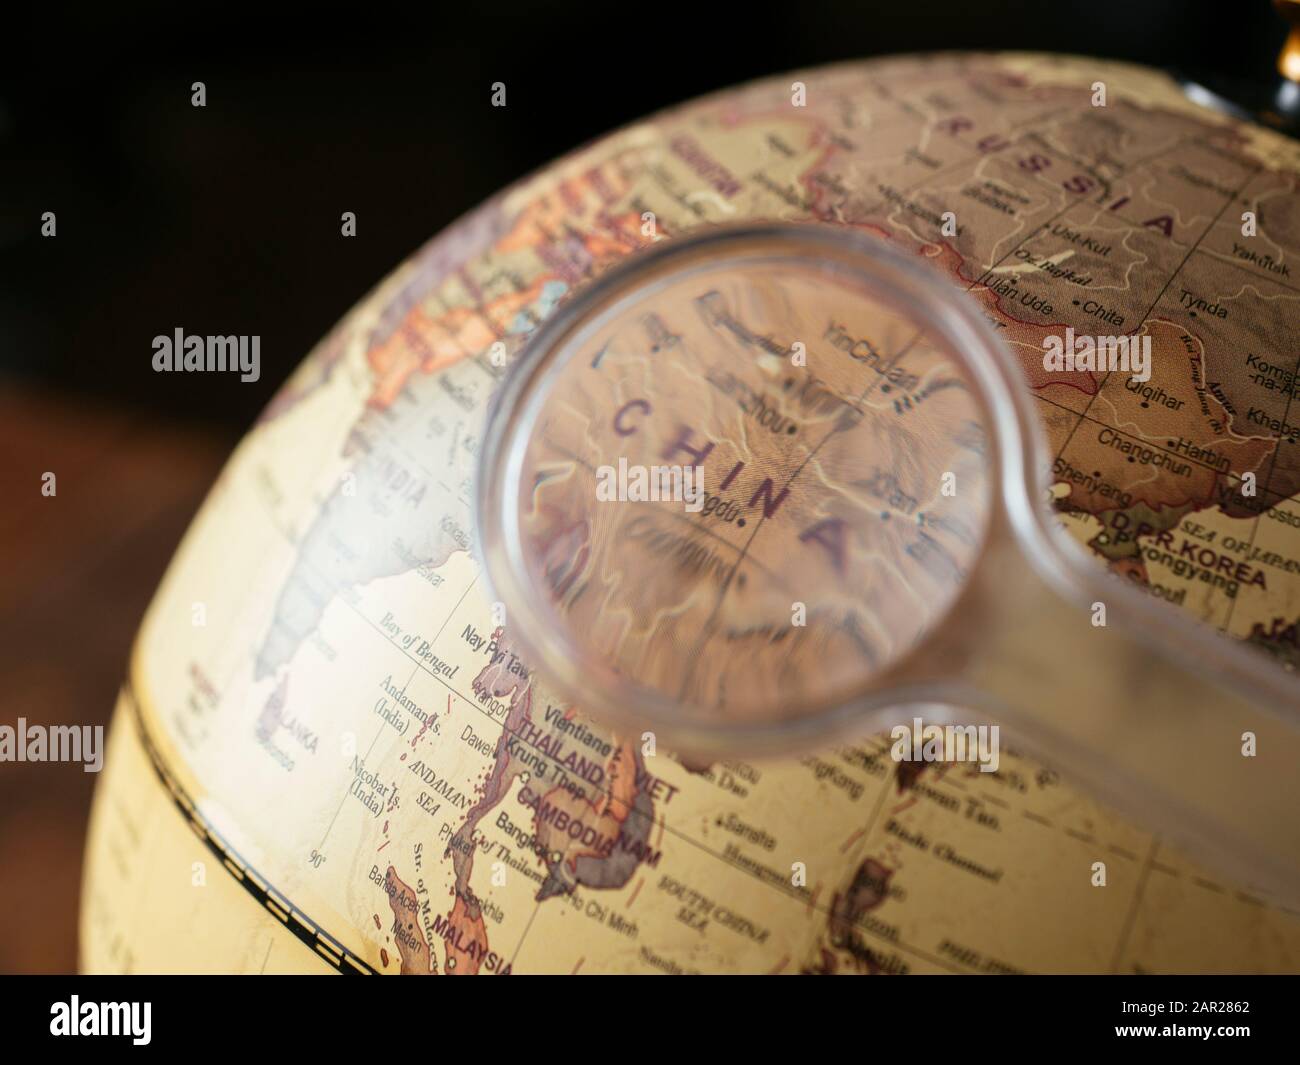 Magnifying glass focusing in on China on a globe. Stock Photo